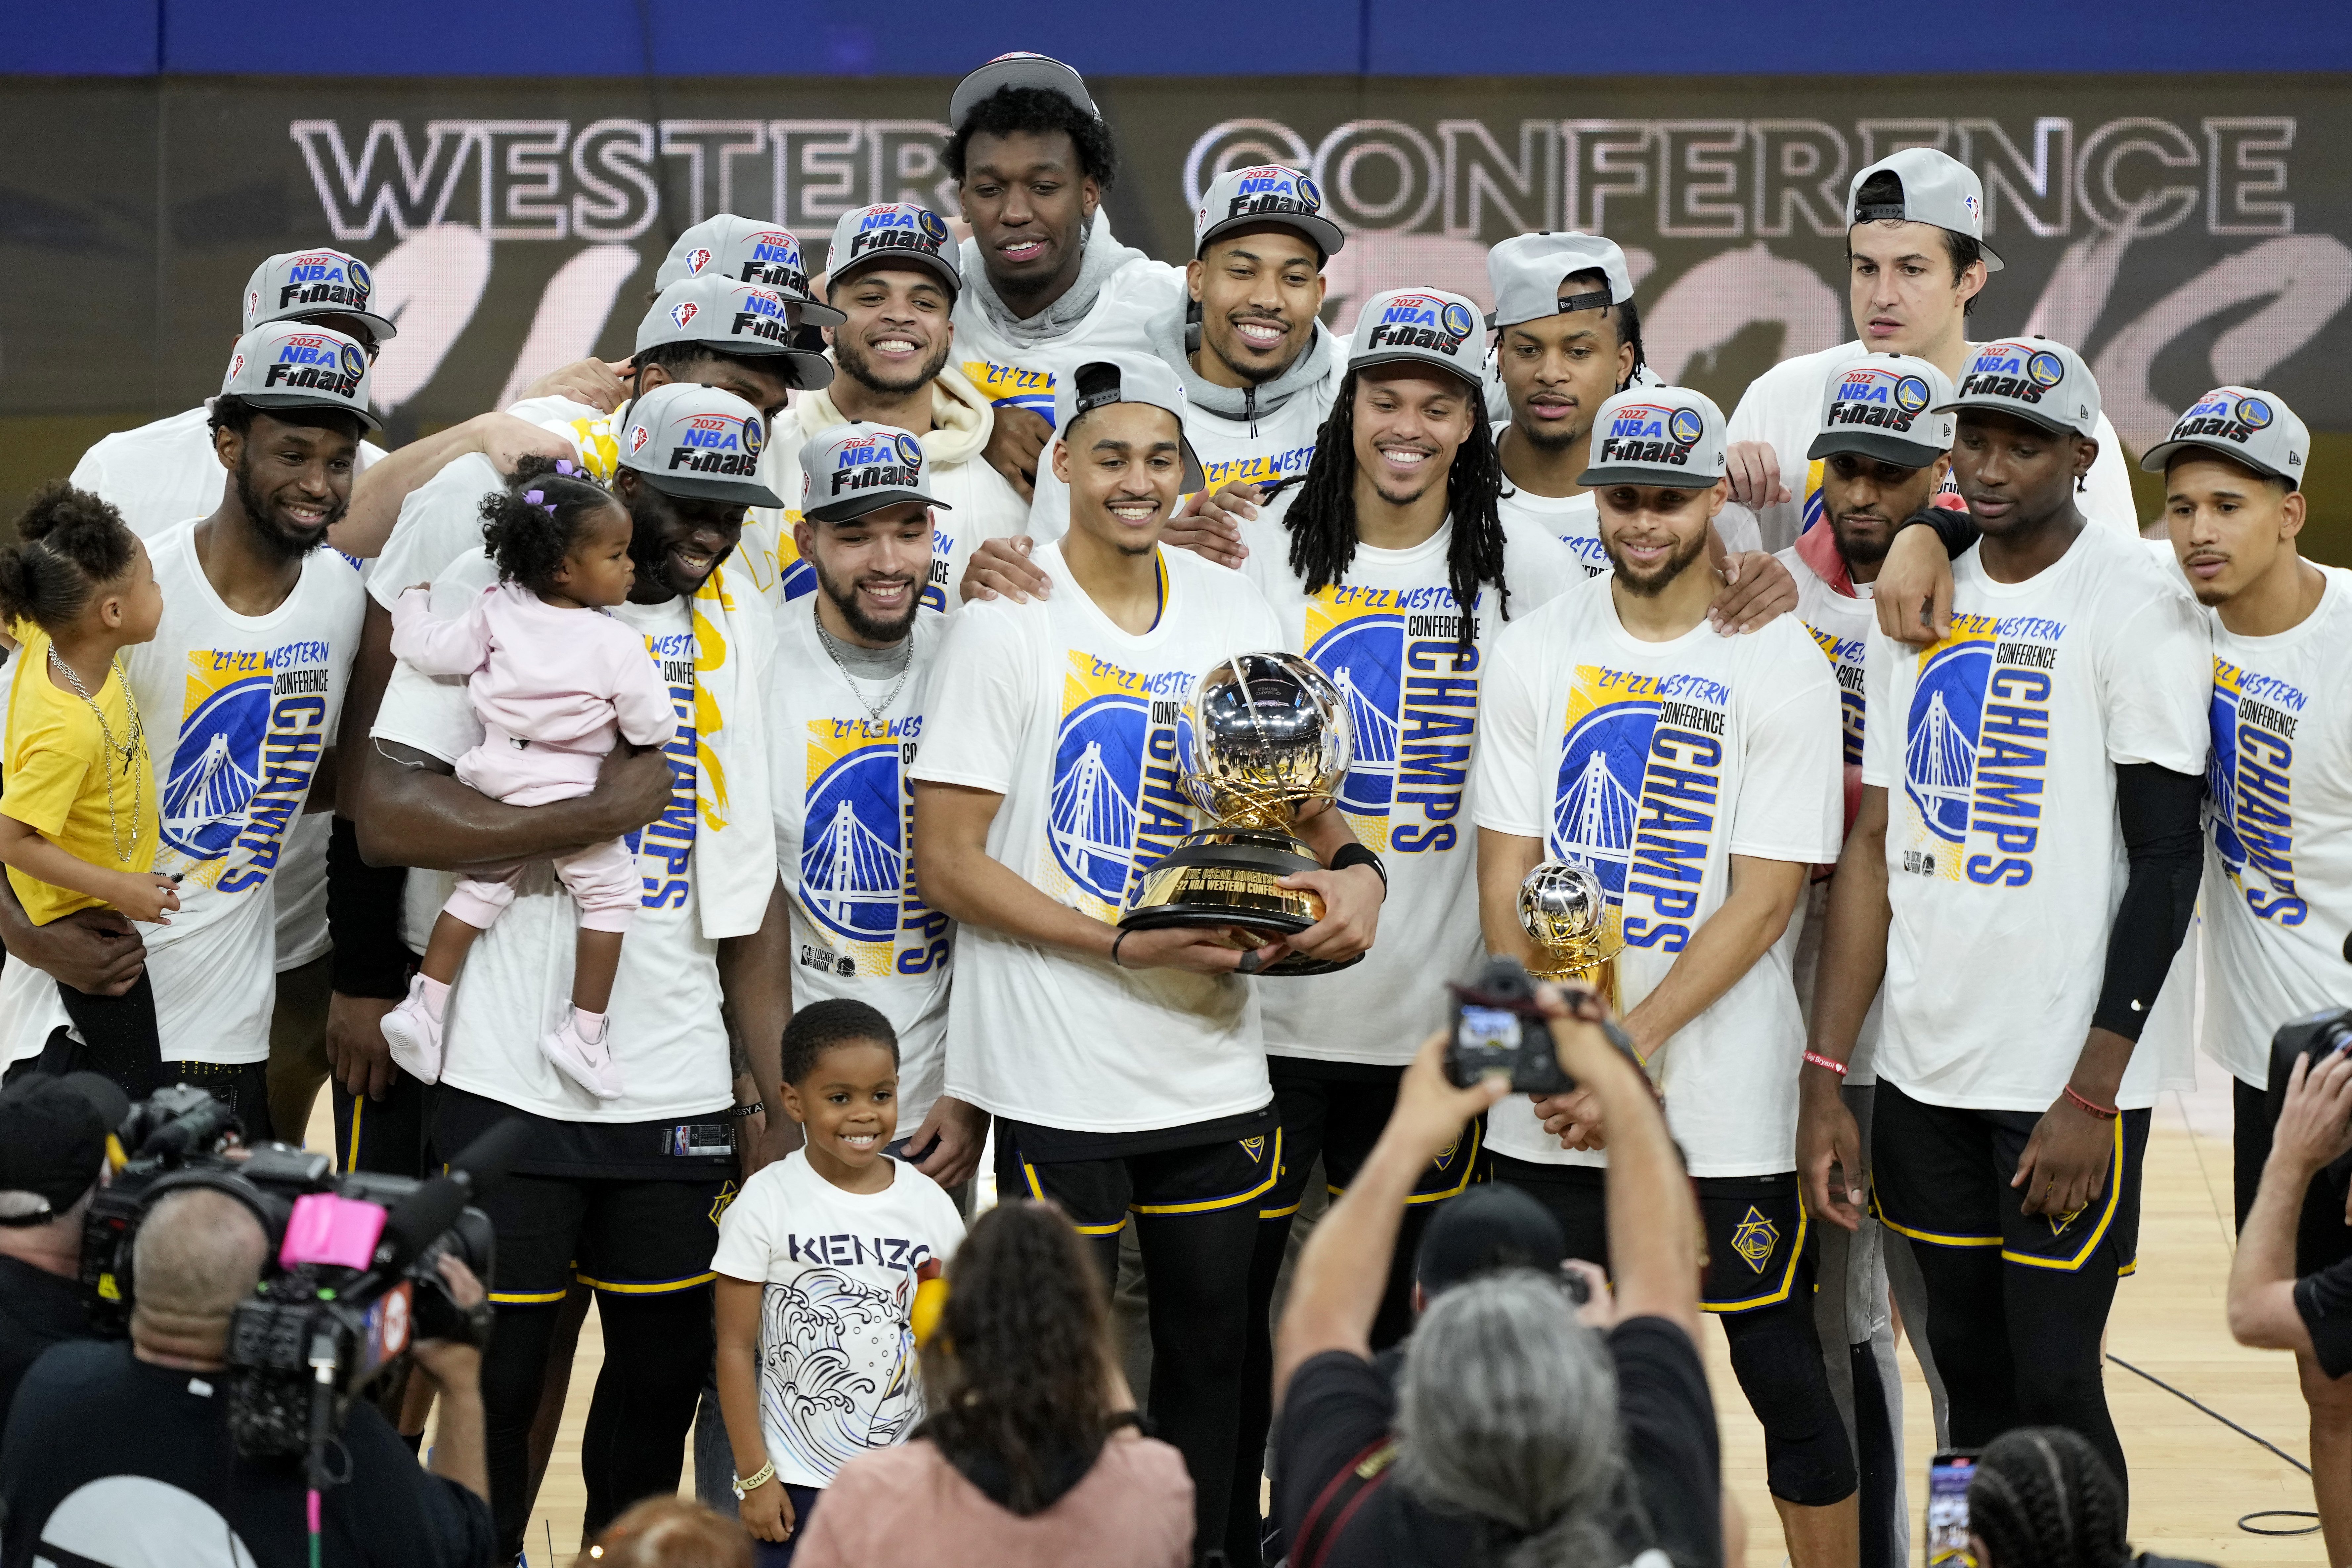 Why Kendrick Lamar's Mr. Morale & the Big Steppers Makes Warriors a Good Bet